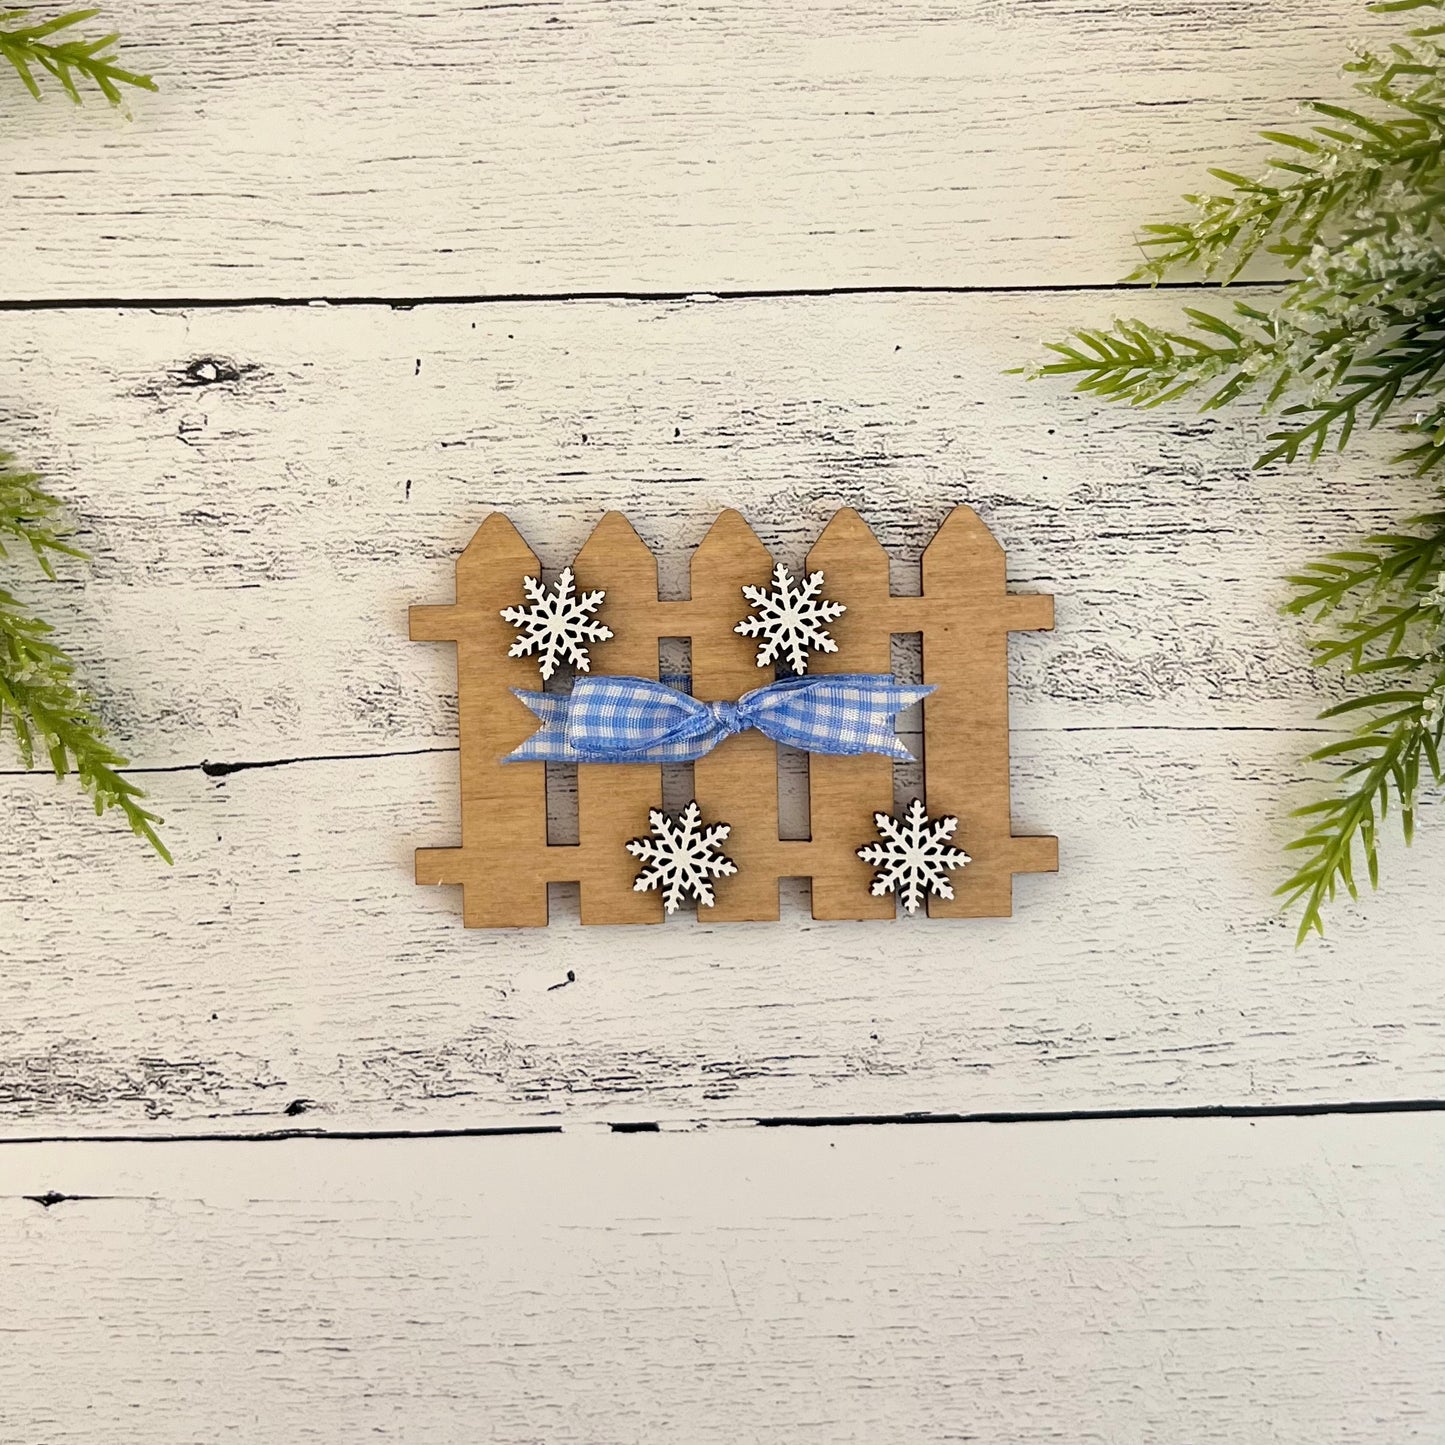 Winter Themed Accent Tiered Tray Decor